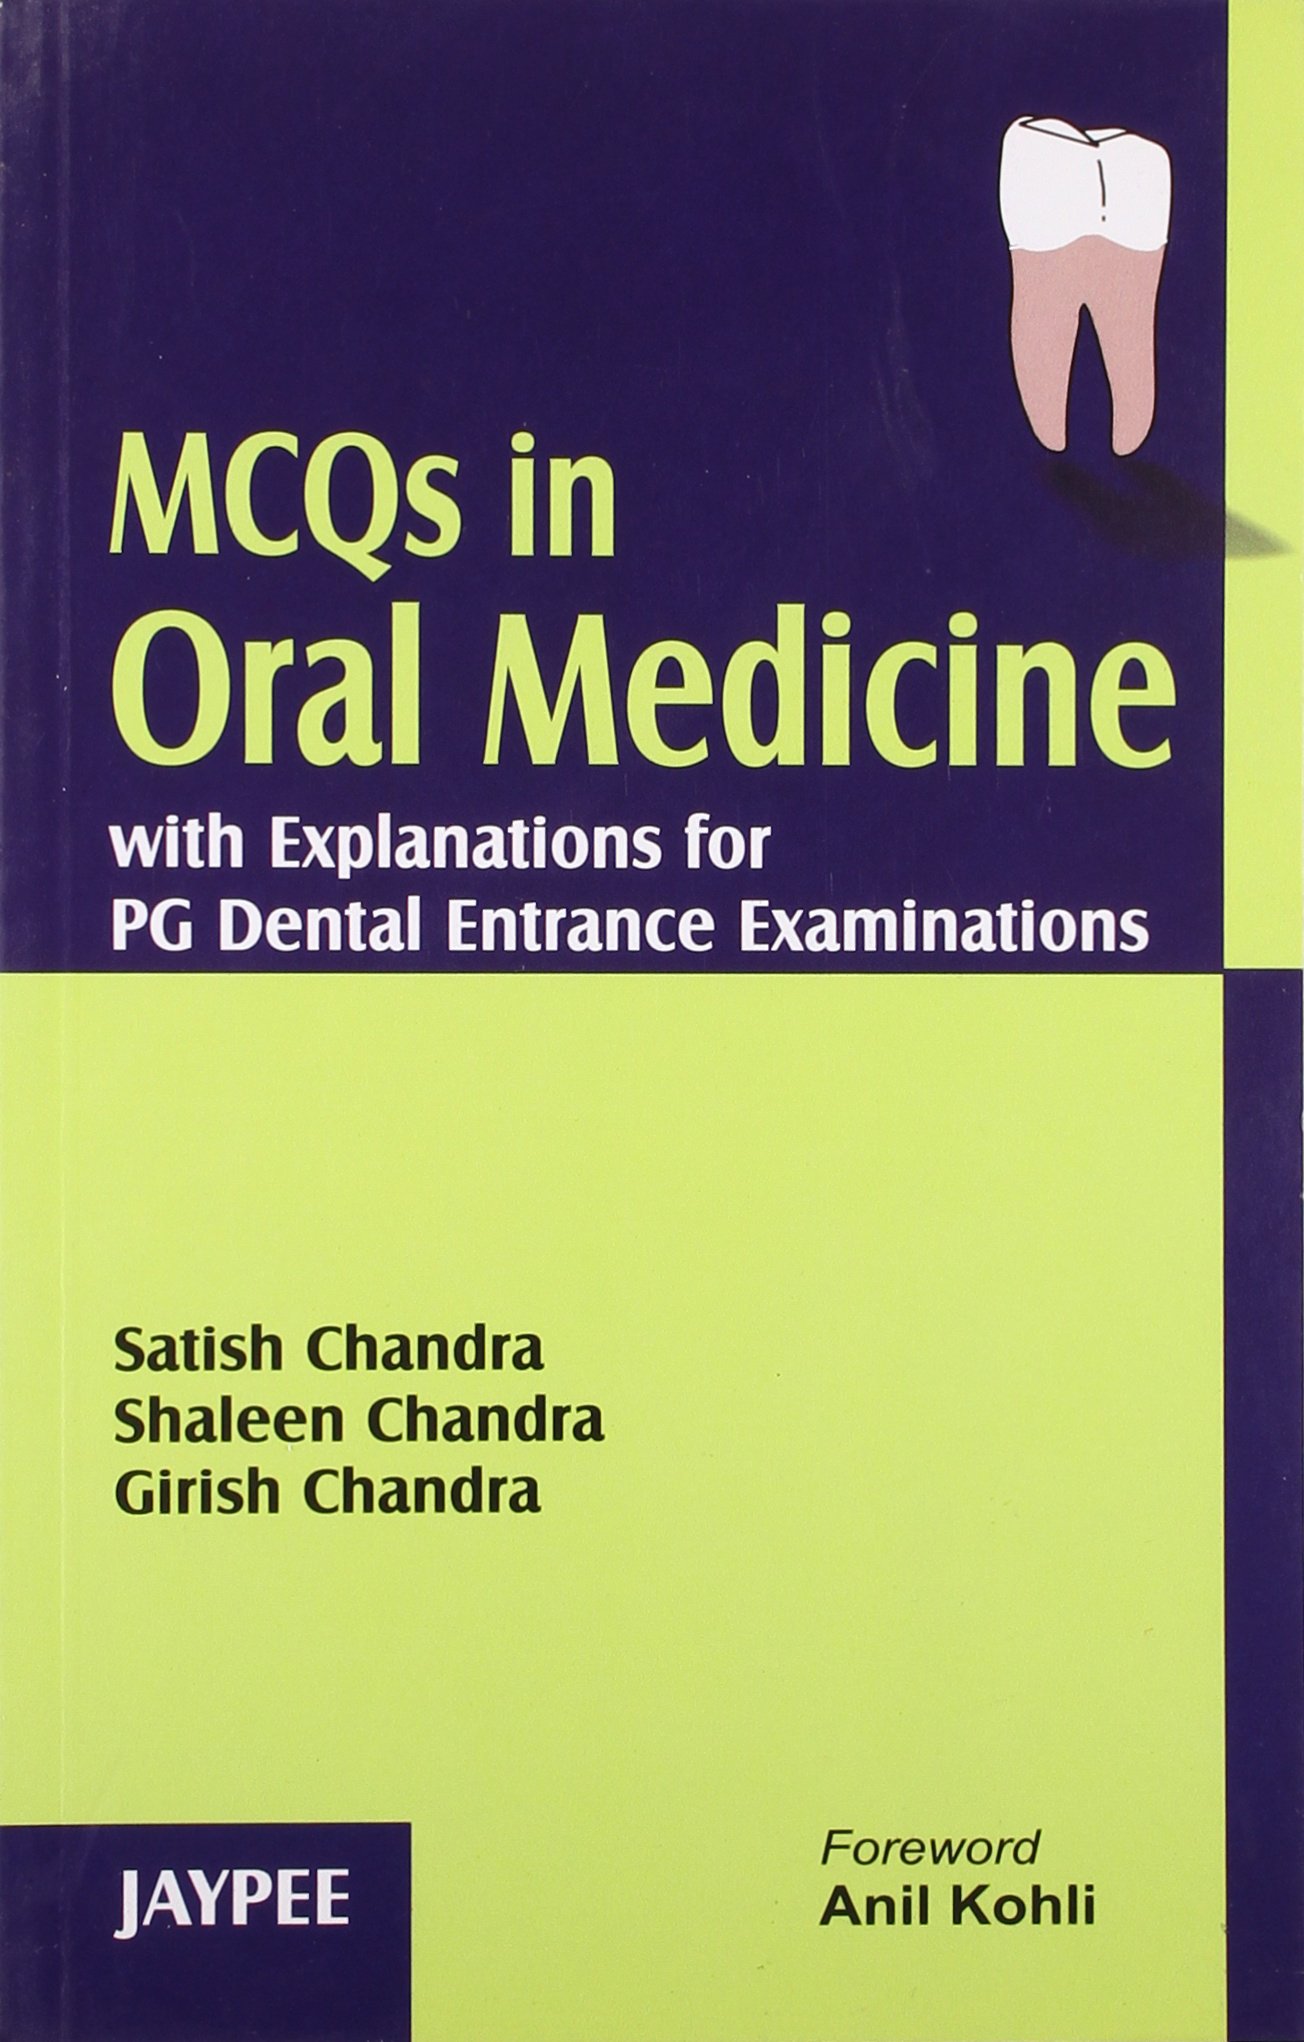 Mcqs In Oral Medicine With Exp.For Pg Dental Ent.Exam.